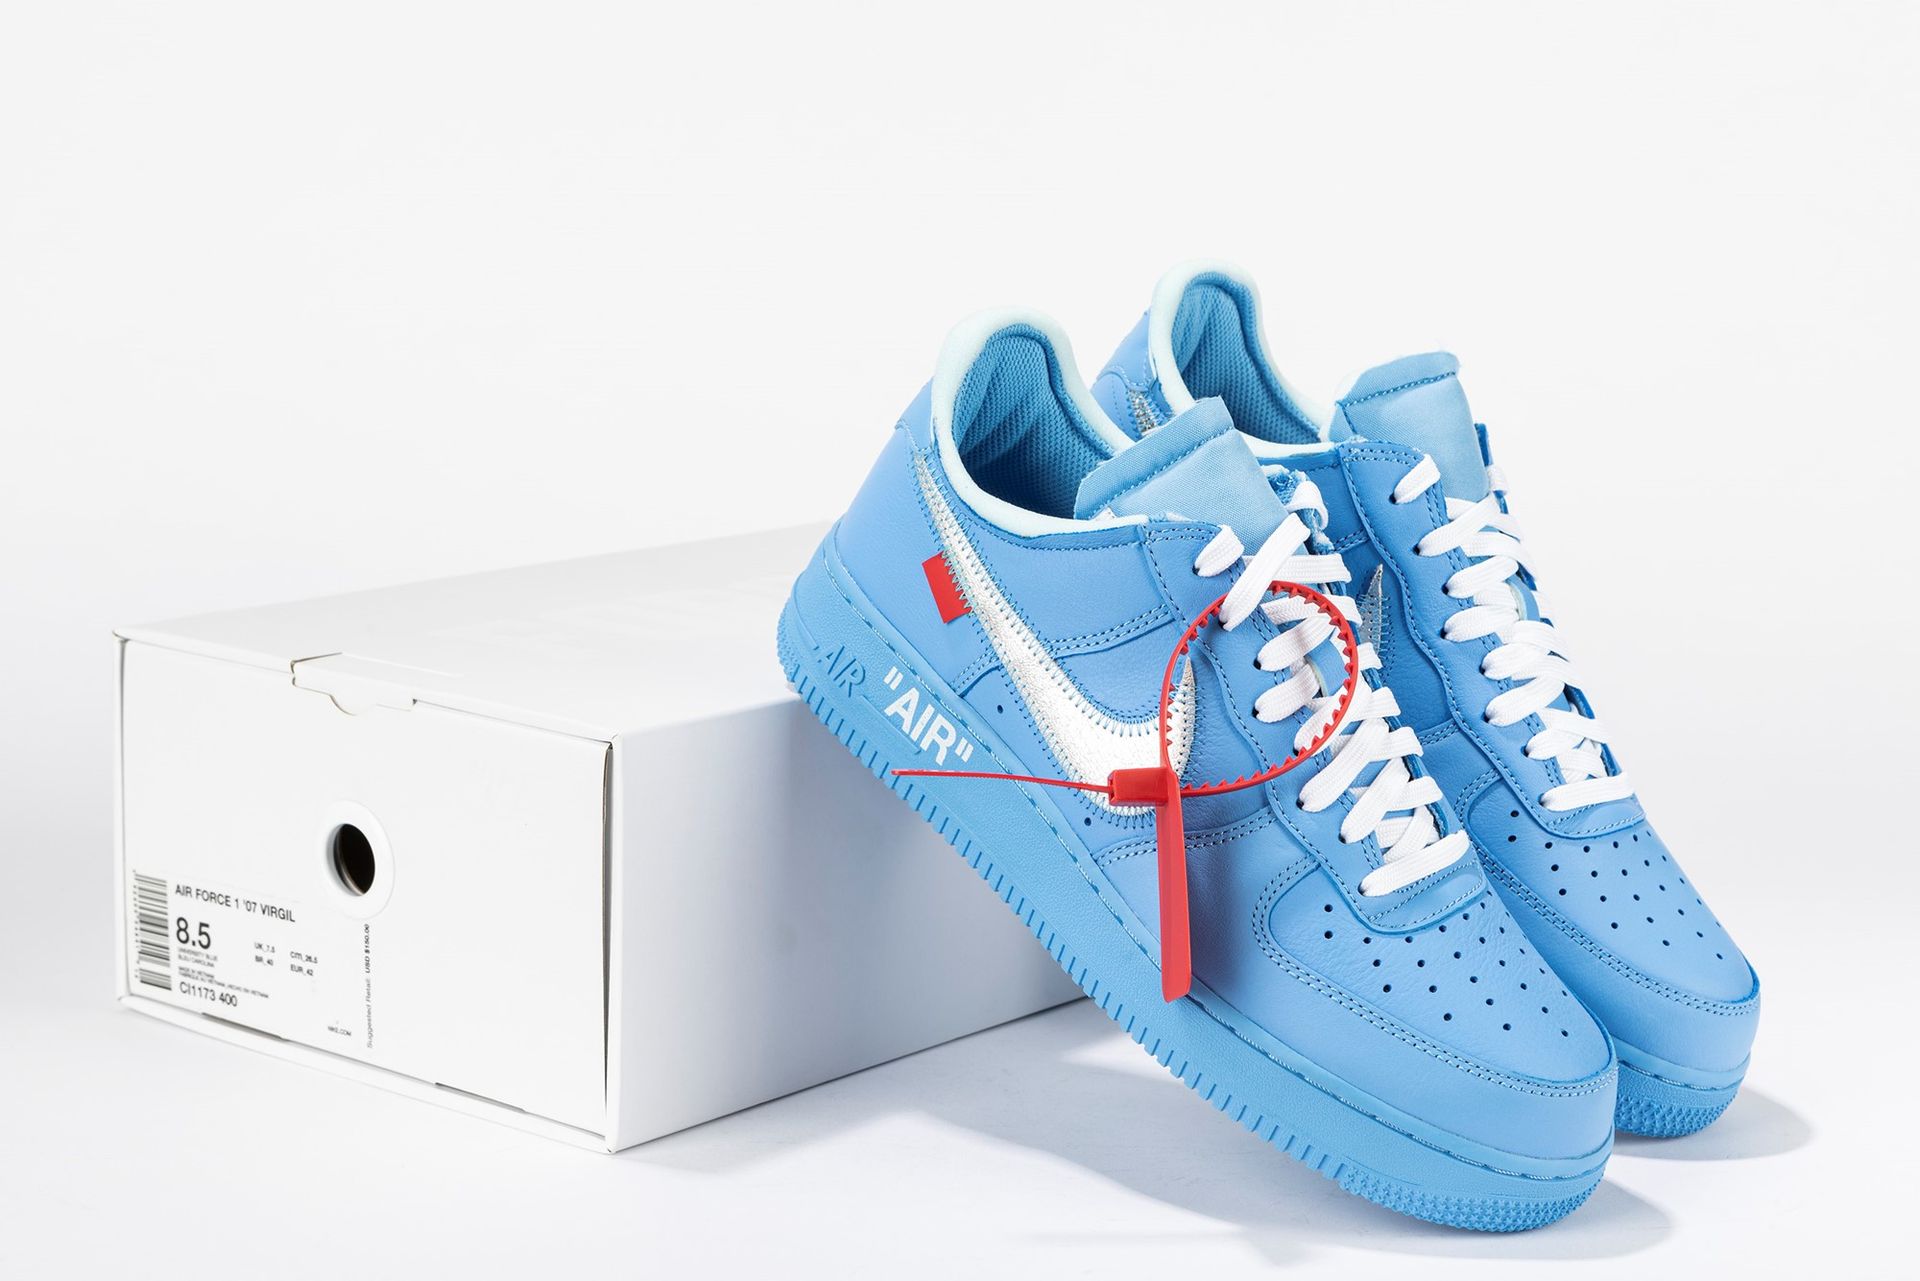 NIKE Air Force 1 Low Off-White MCA | Size US 8.5 EUR 42, 2019


Nike Air Force 1&hellip;